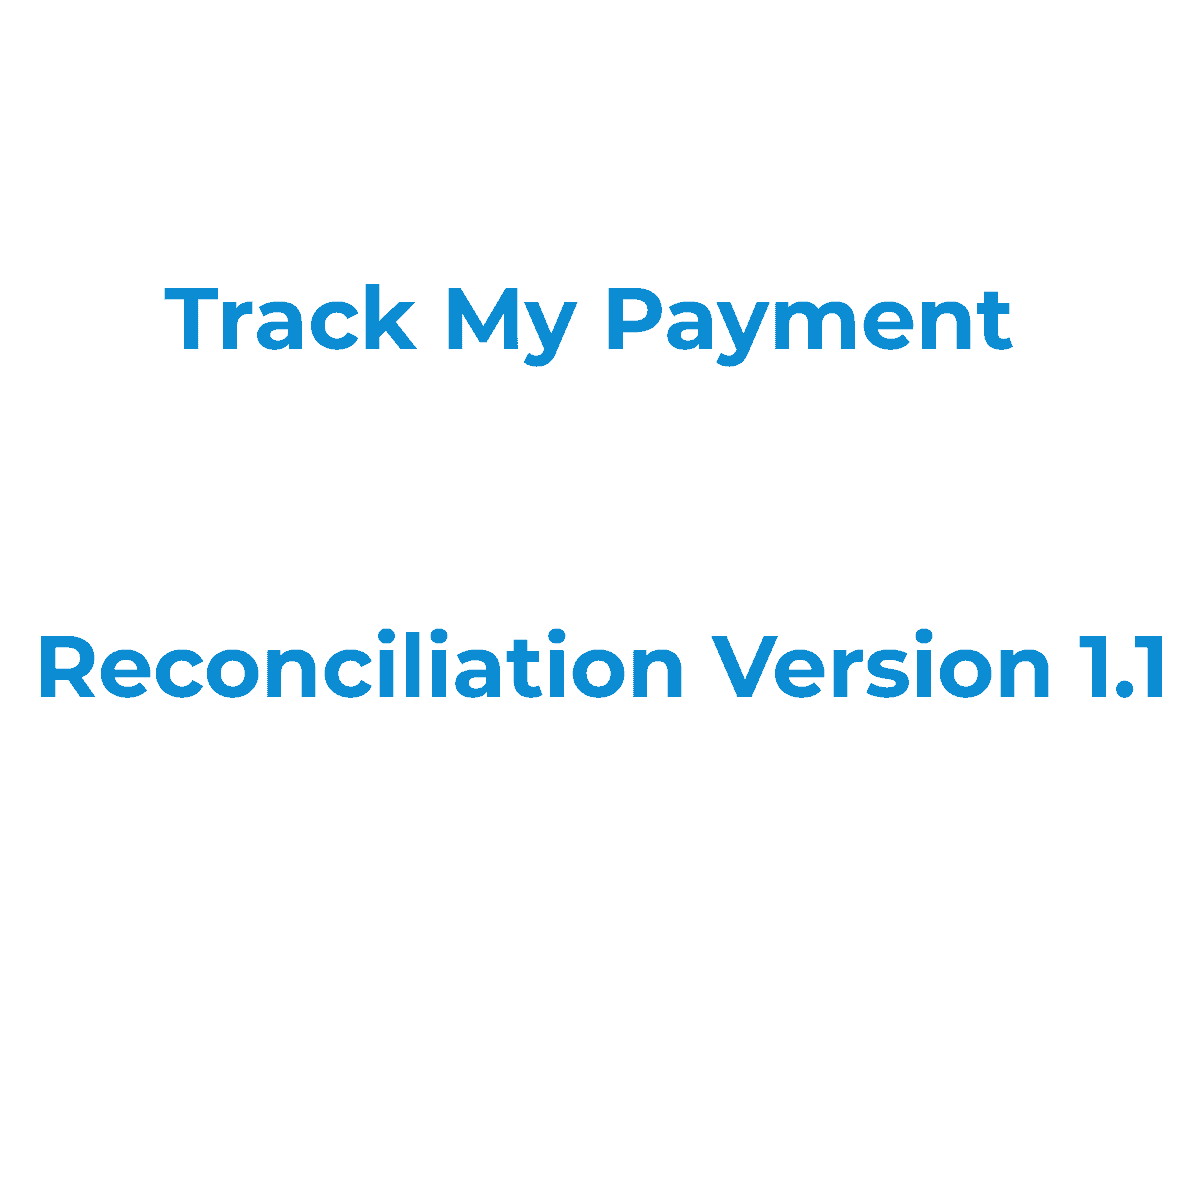 Track My Payment Reconciliation Version 1.1